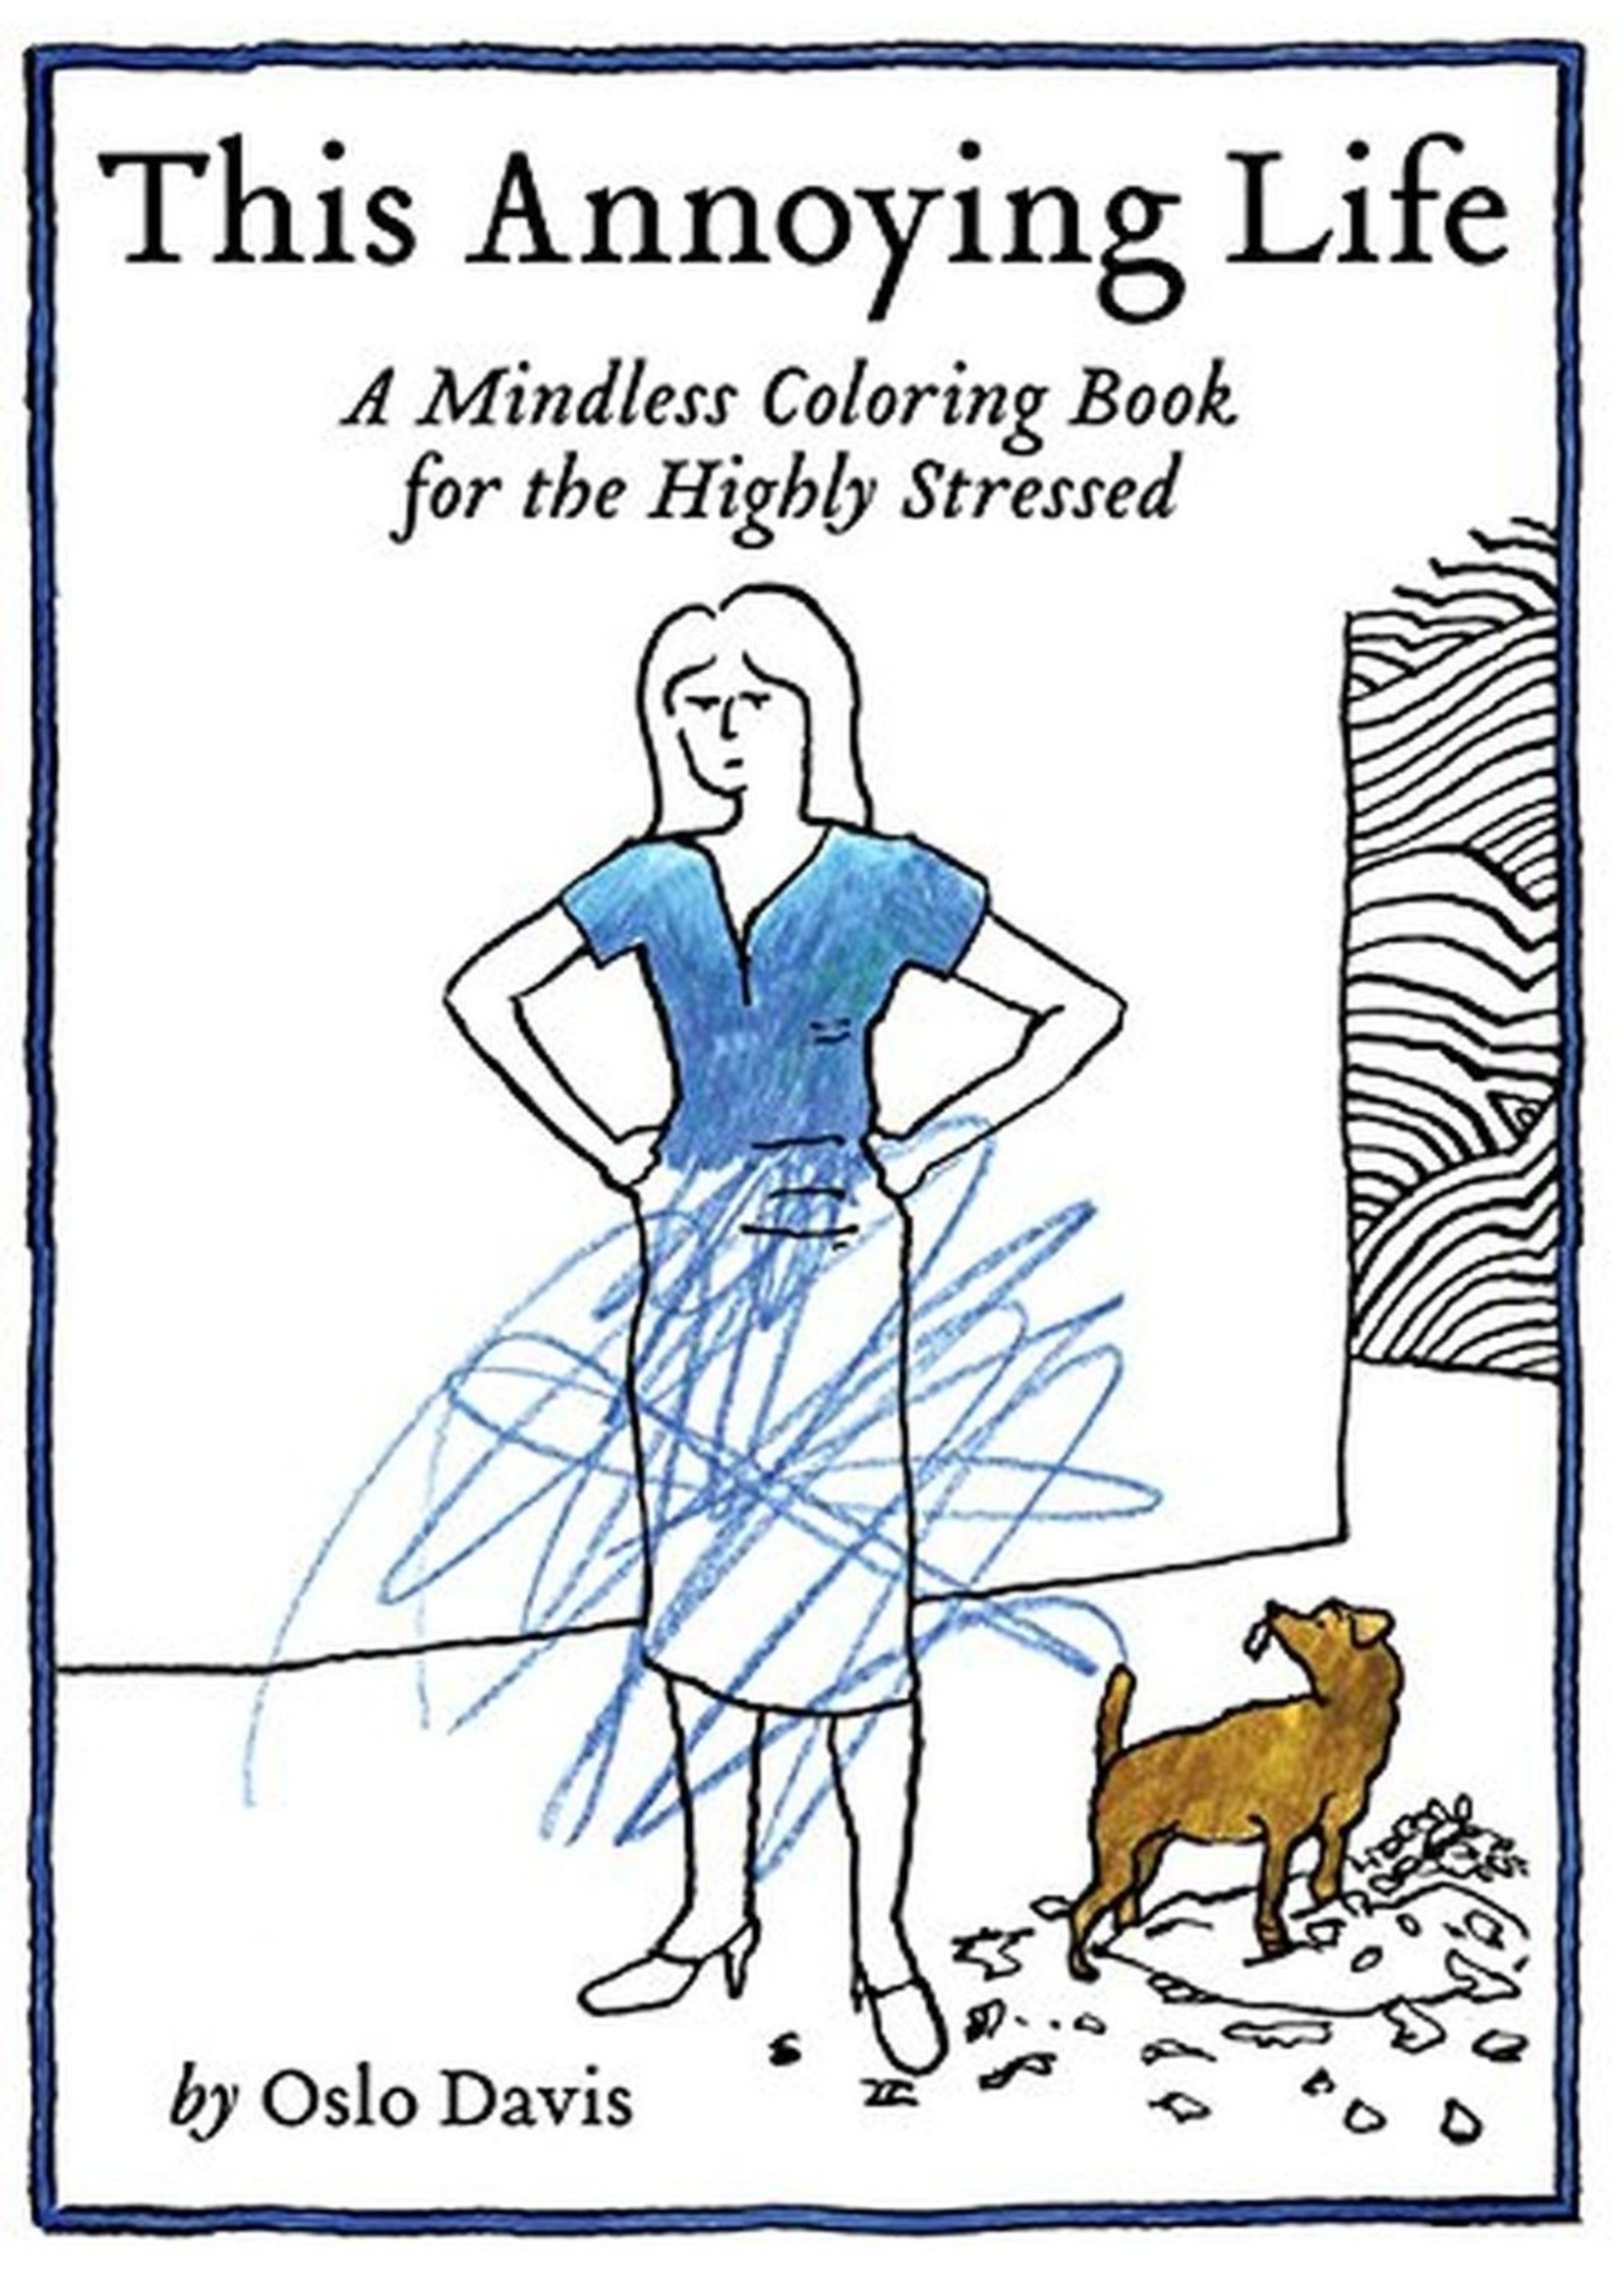 Chronicle books A mindless coloring book THIS ANNOYING LIFE